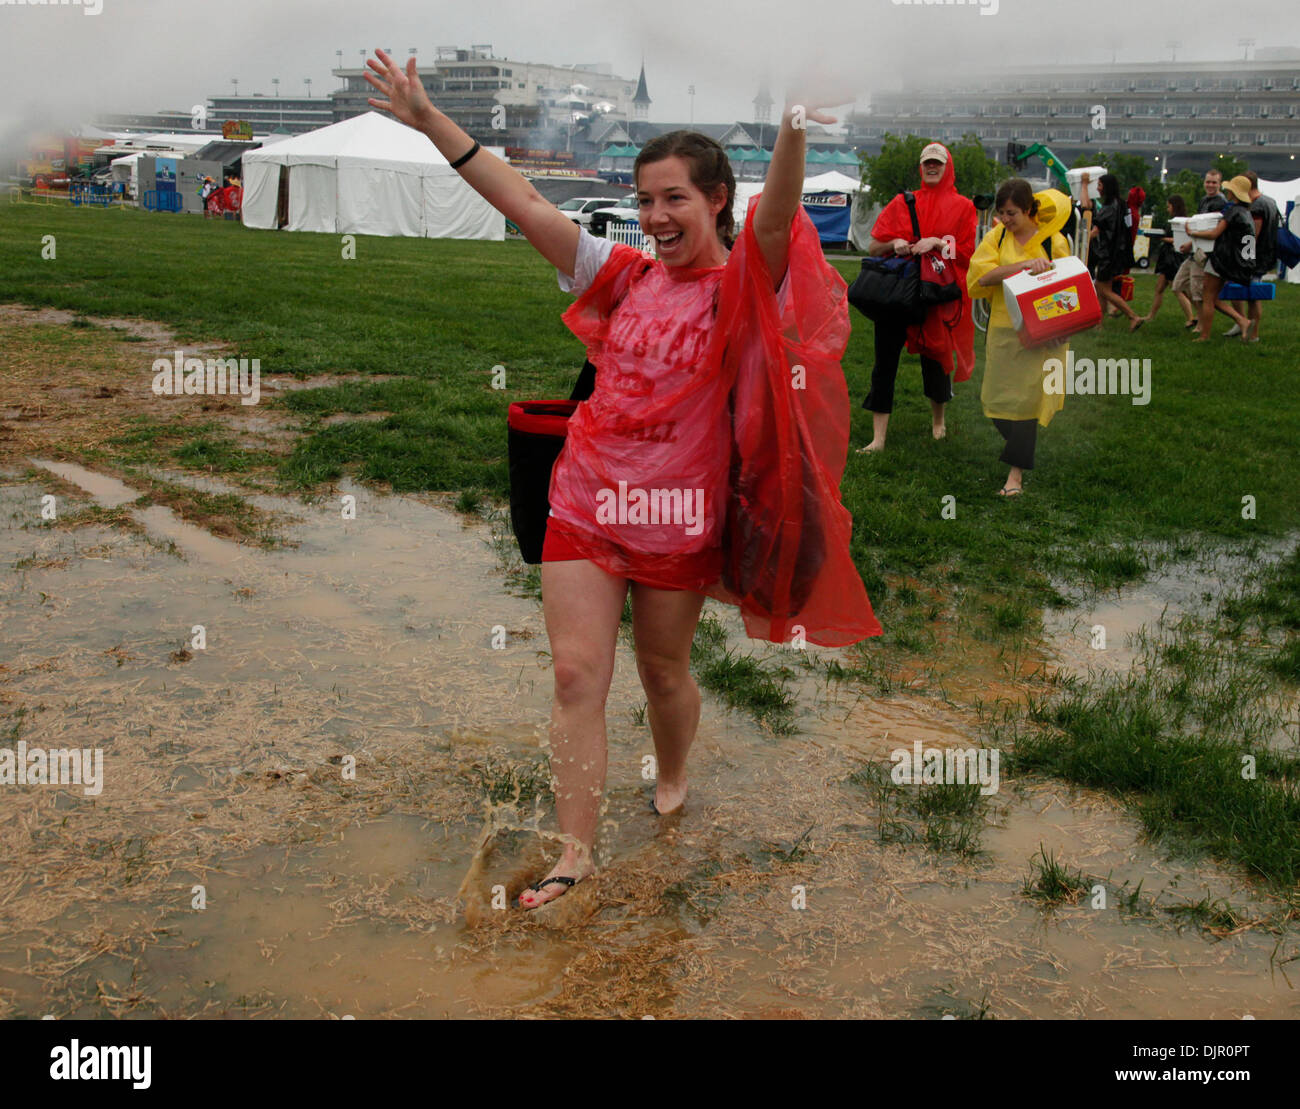 May 01, 2010 - Louisville, Kentucky, U.S. - Erin Skelton, Columbus, Ohio, celebrated her 26th birthday by wading into the infield at the 136th running of the Kentucky Derby at Churchill Downs Saturday May 1, 2010. Photo by David Stephenson (Credit Image: © Lexington Herald-Leader/ZUMApress.com) Stock Photo